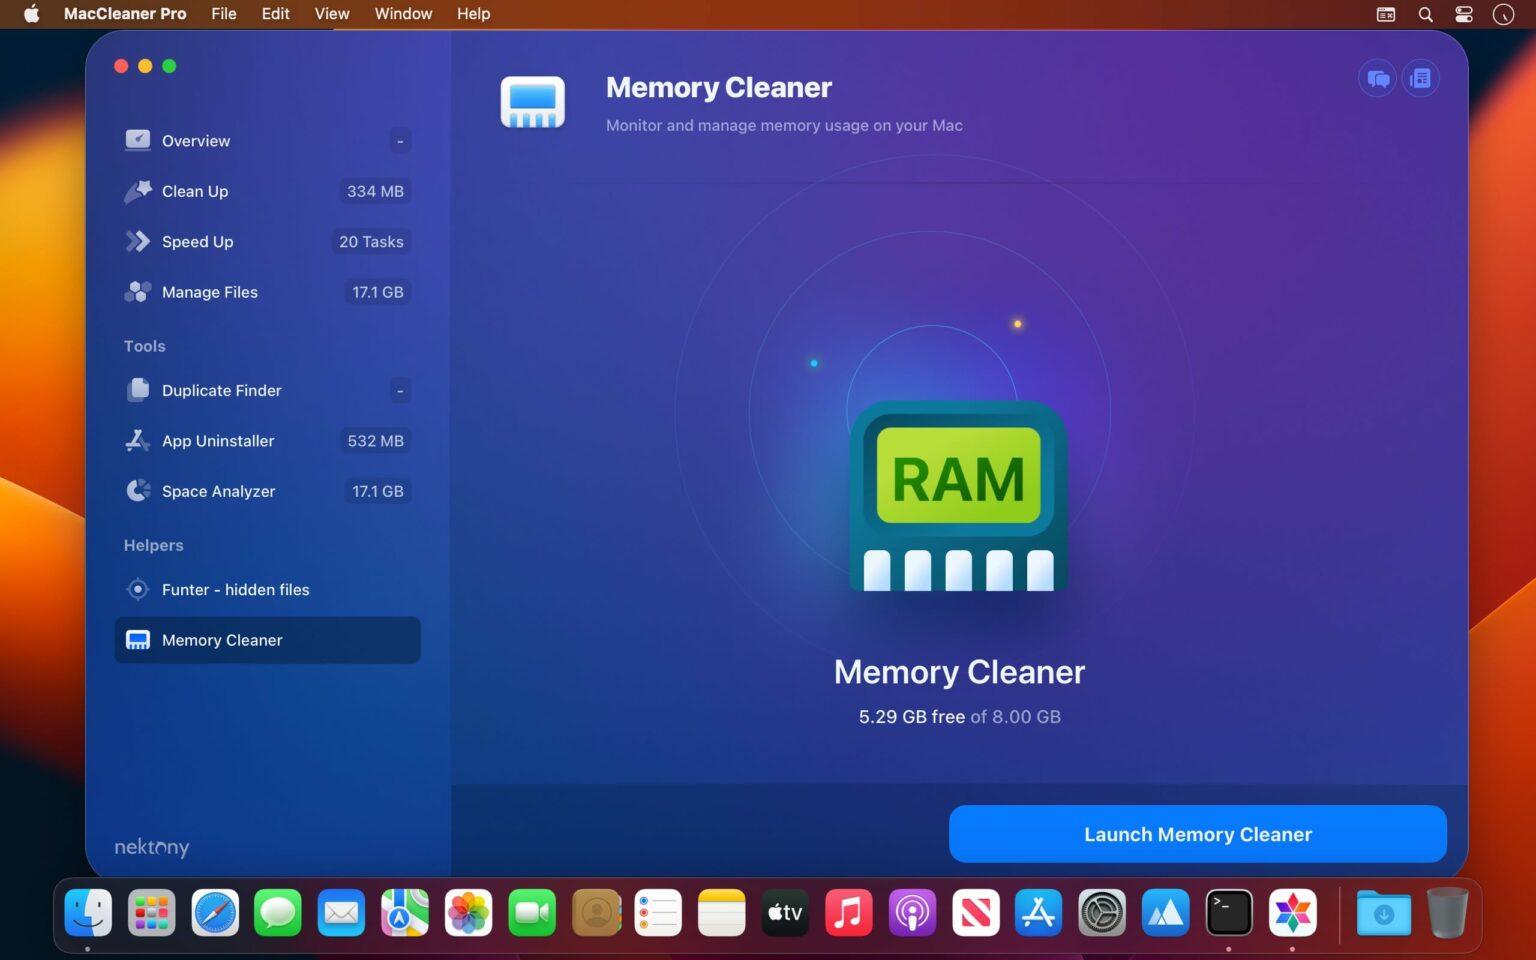 download the new version for apple MacCleaner 3 PRO